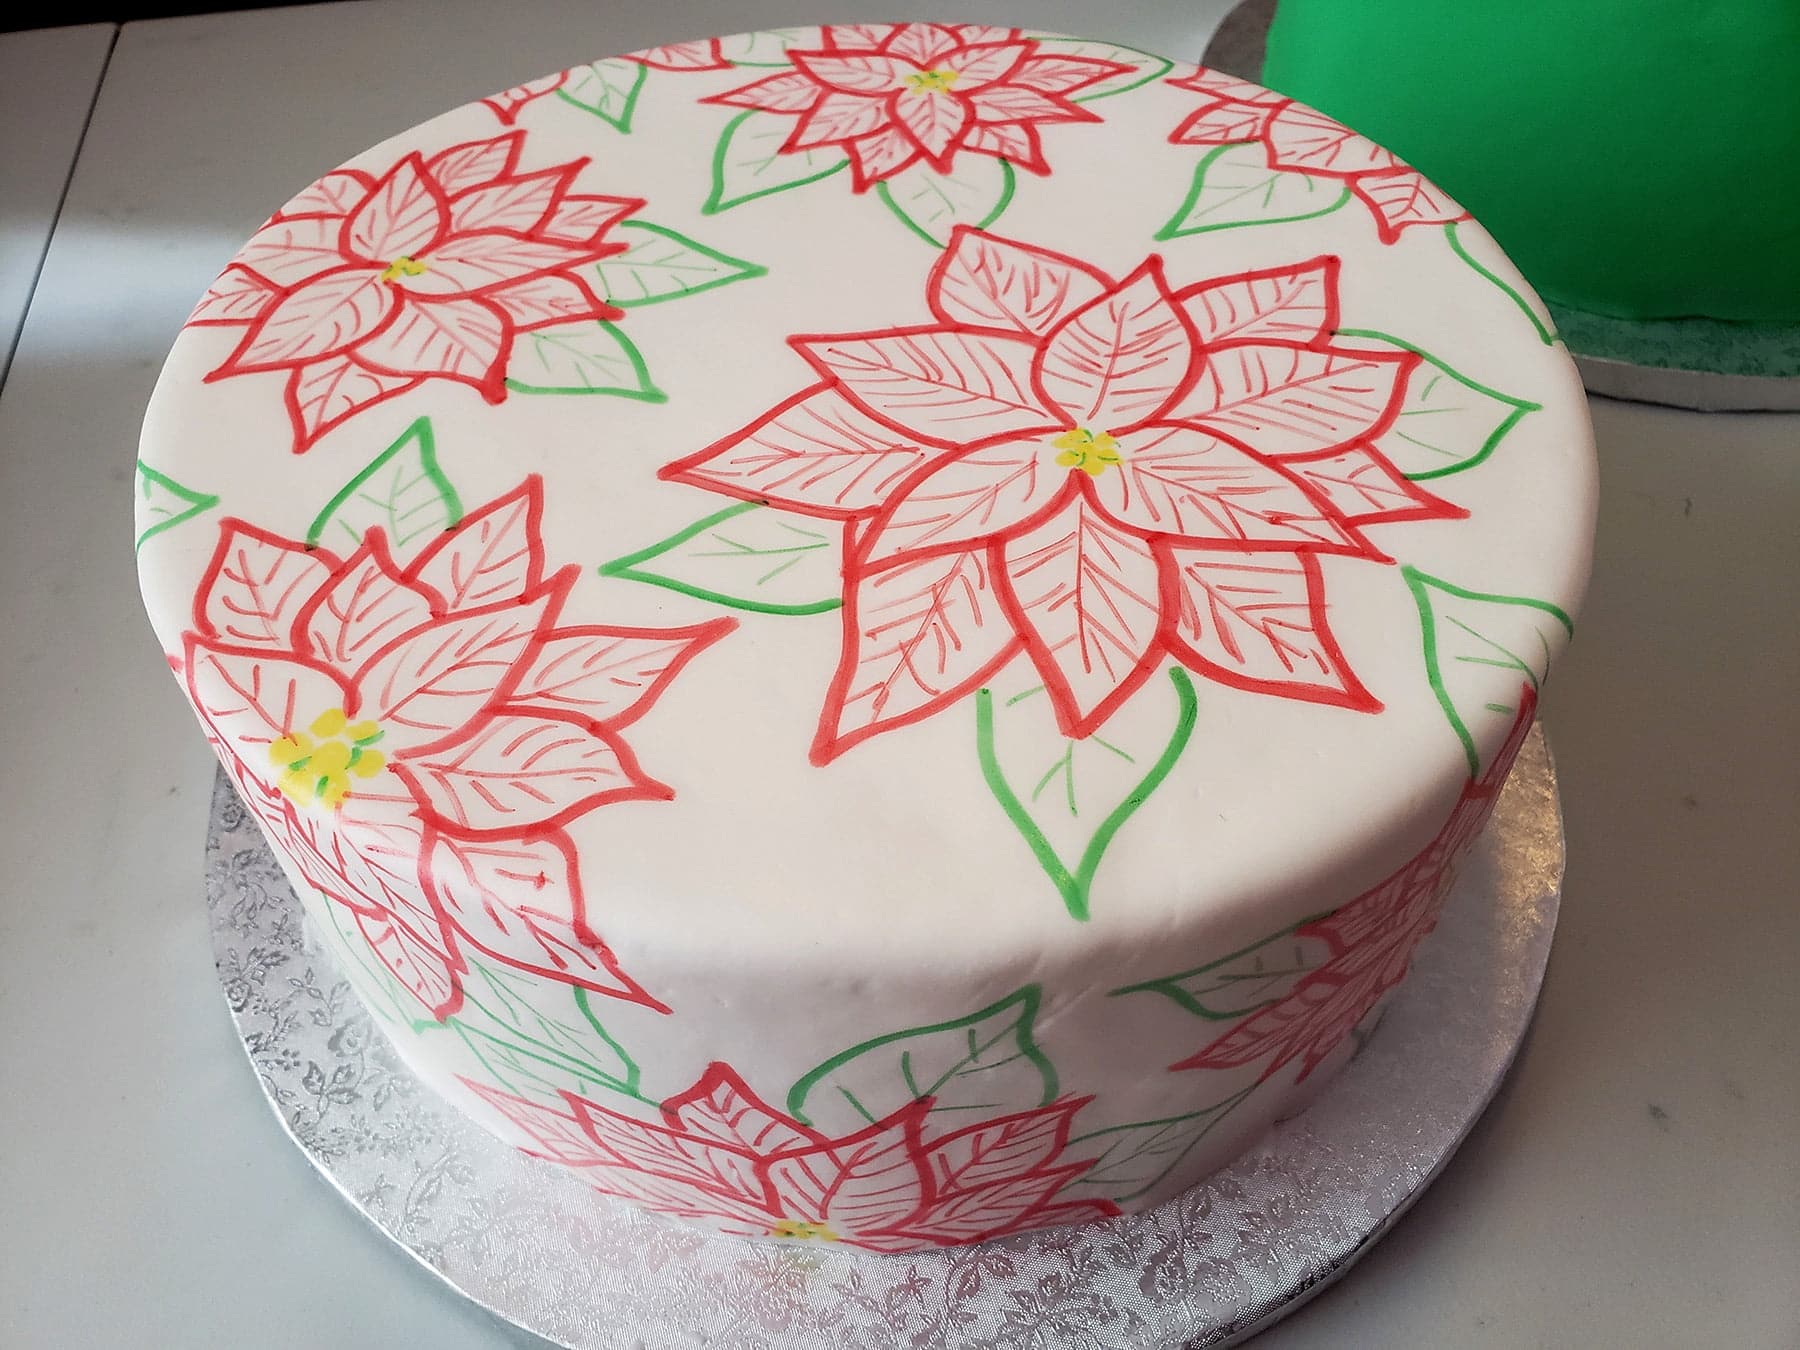 A large round cake covered in smooth white fondant has red poinsettias and green leaves drawn all over it.